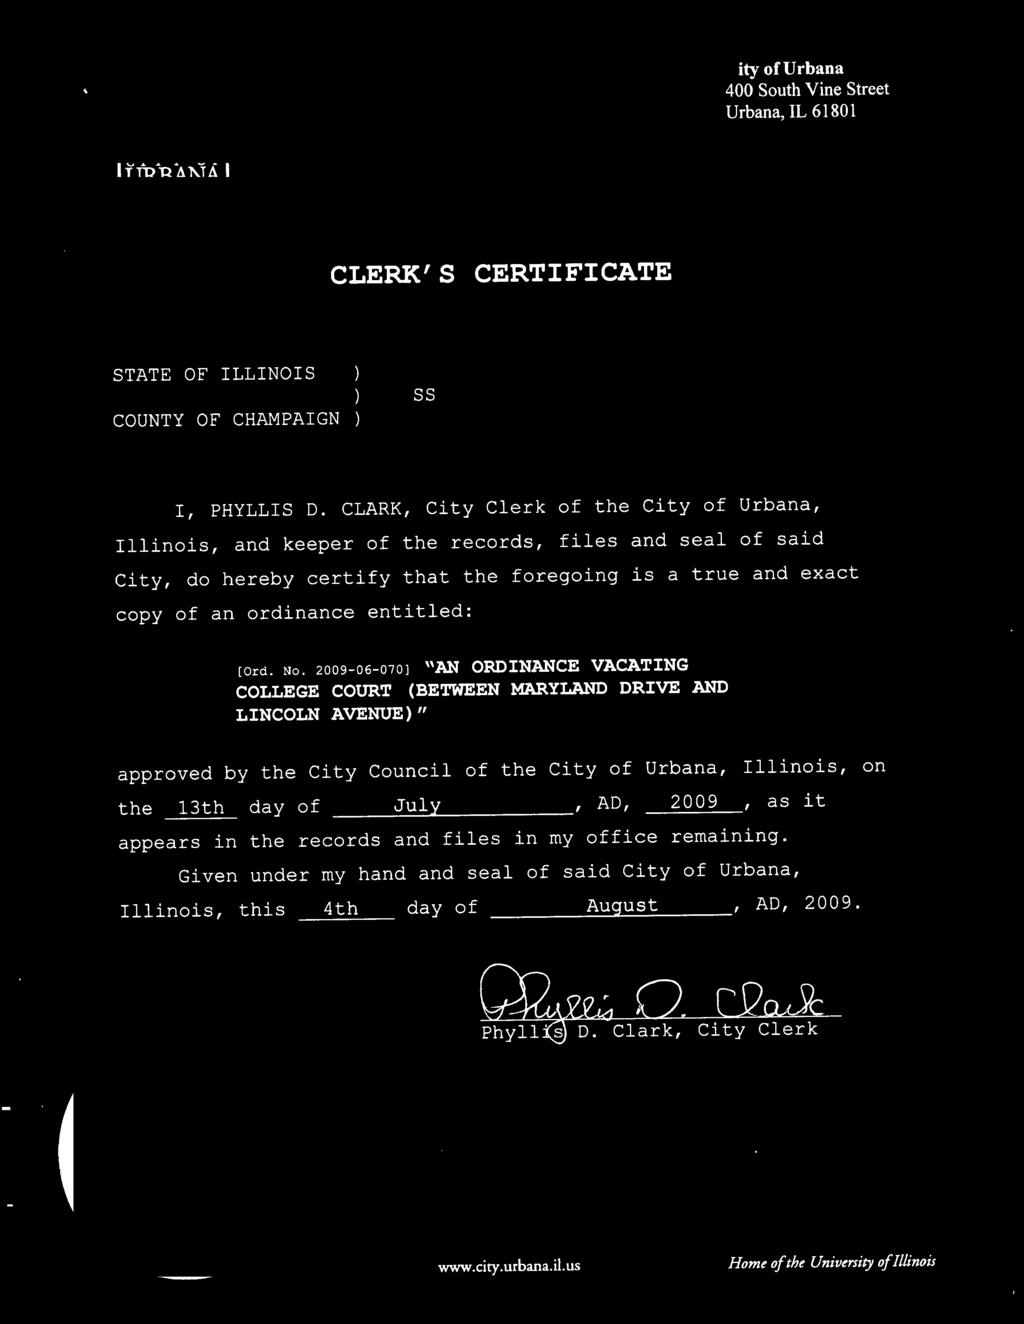 CLARK, City Cl erk of the City of Urbana, Illinois, and keeper of the records, files and seal of